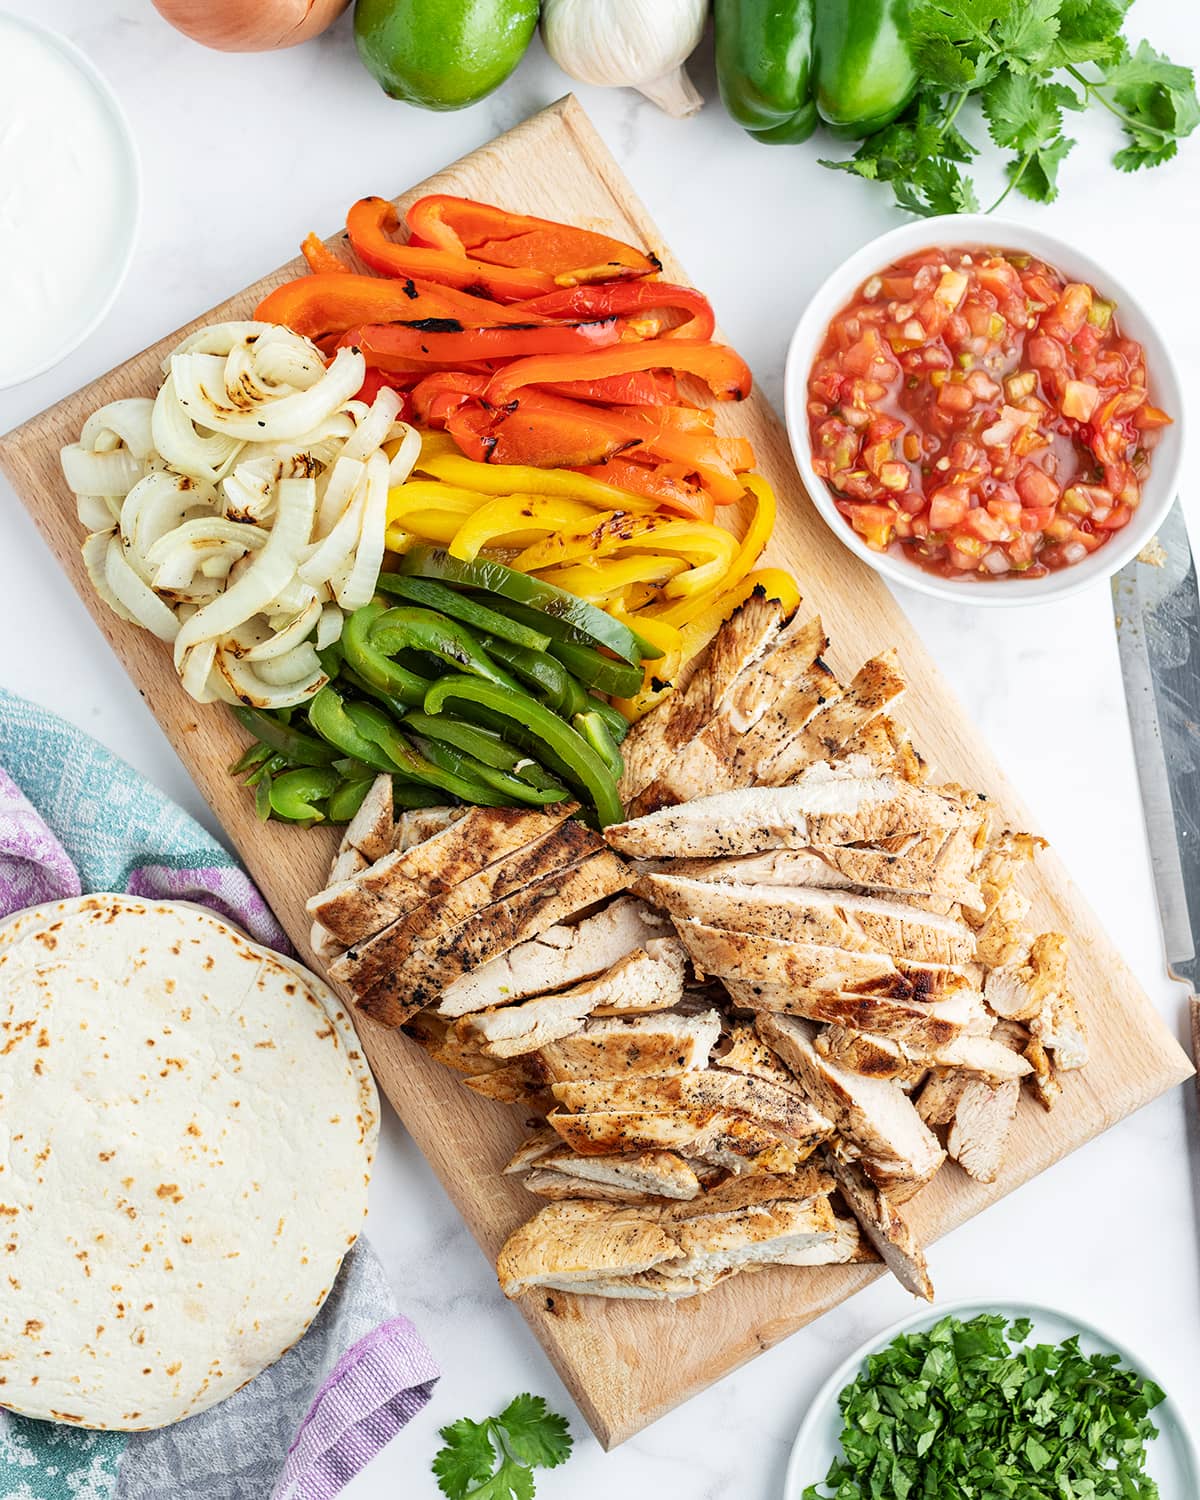 A tray of ingredients for chicken fajitas, with grilled chicken, bell peppers, and onion.